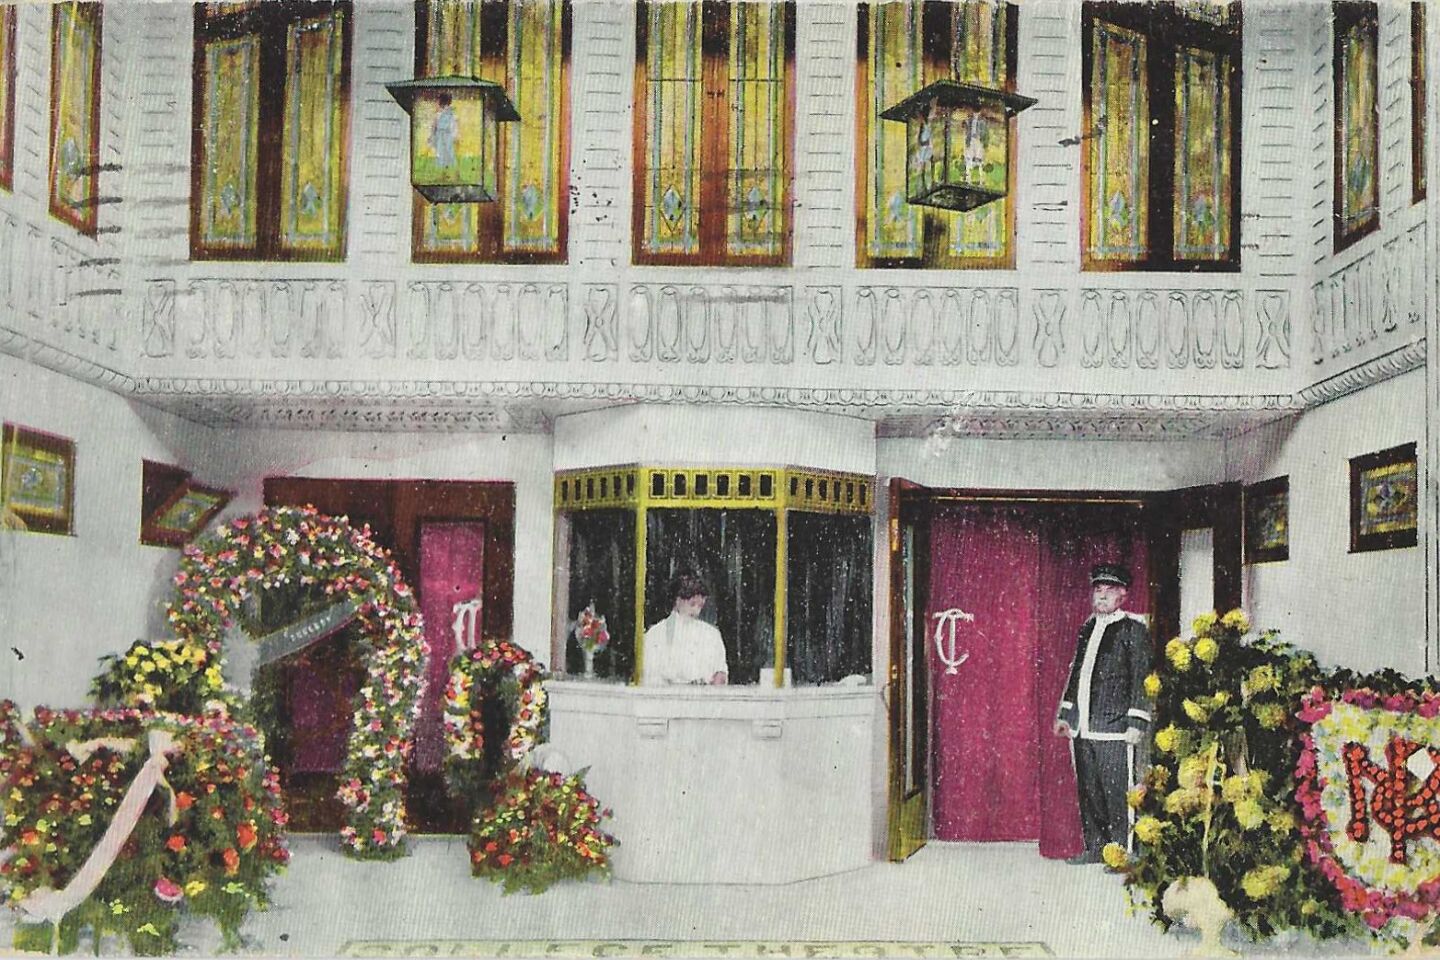 Vintage postcard shows the entrance to the College Theater, bedecked with flowers and red curtains, with a uniformed doorman.